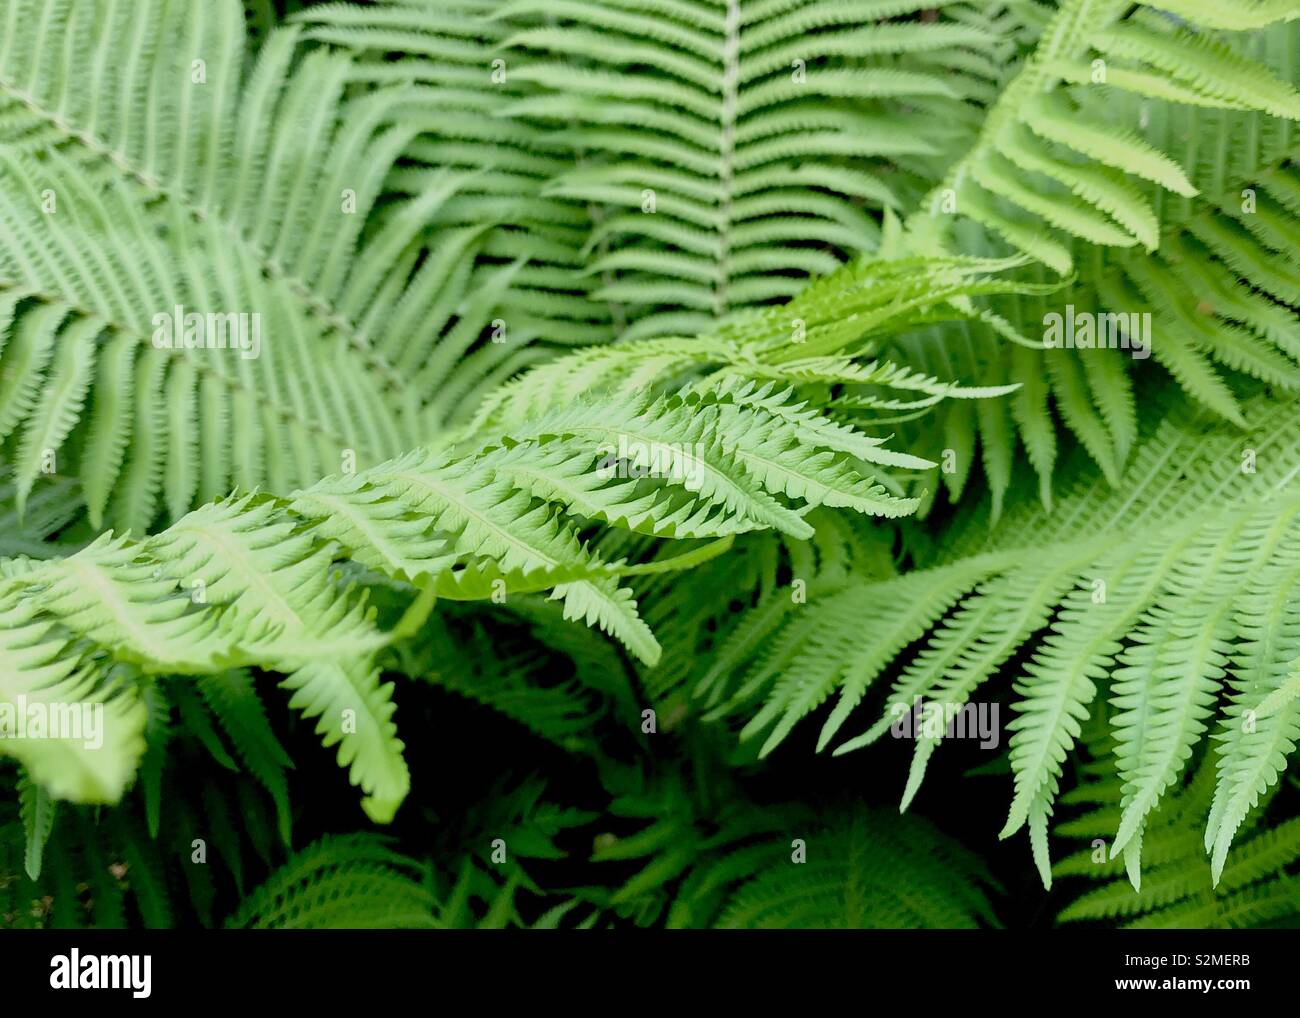 Delicate and lacy spring fern Stock Photo